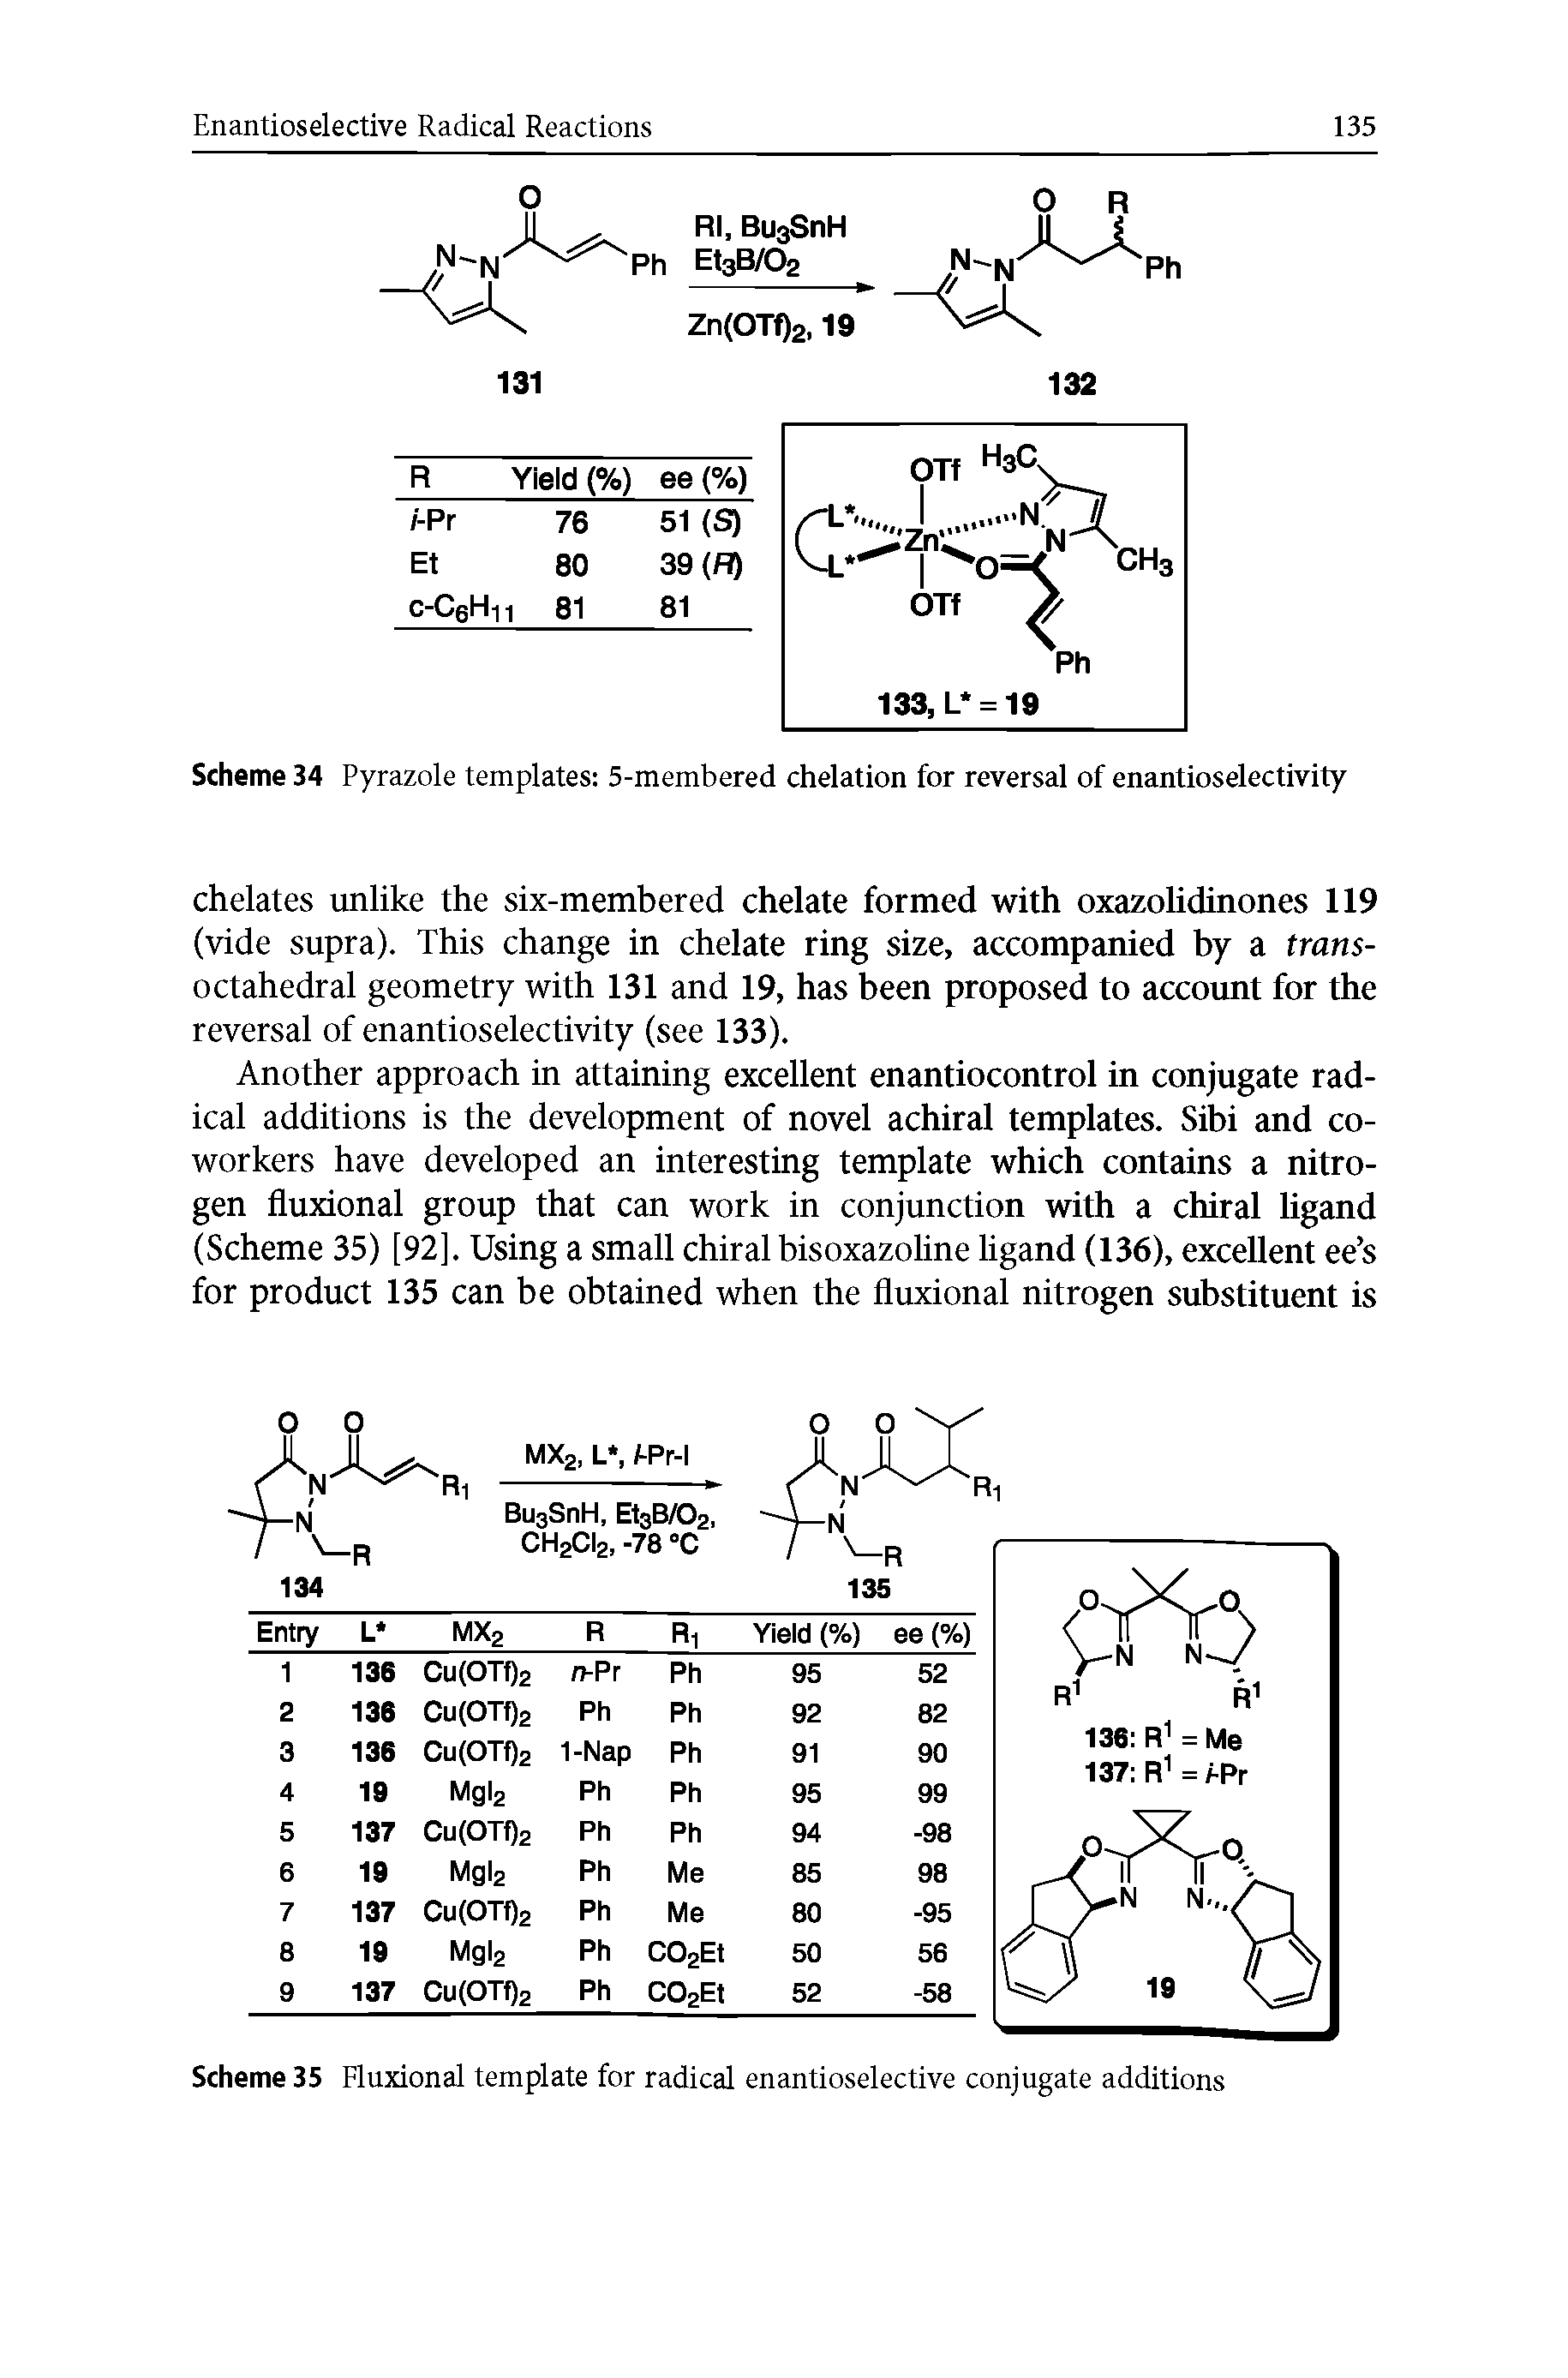 Scheme 35 Fluxional template for radical enantioselective conjugate additions...